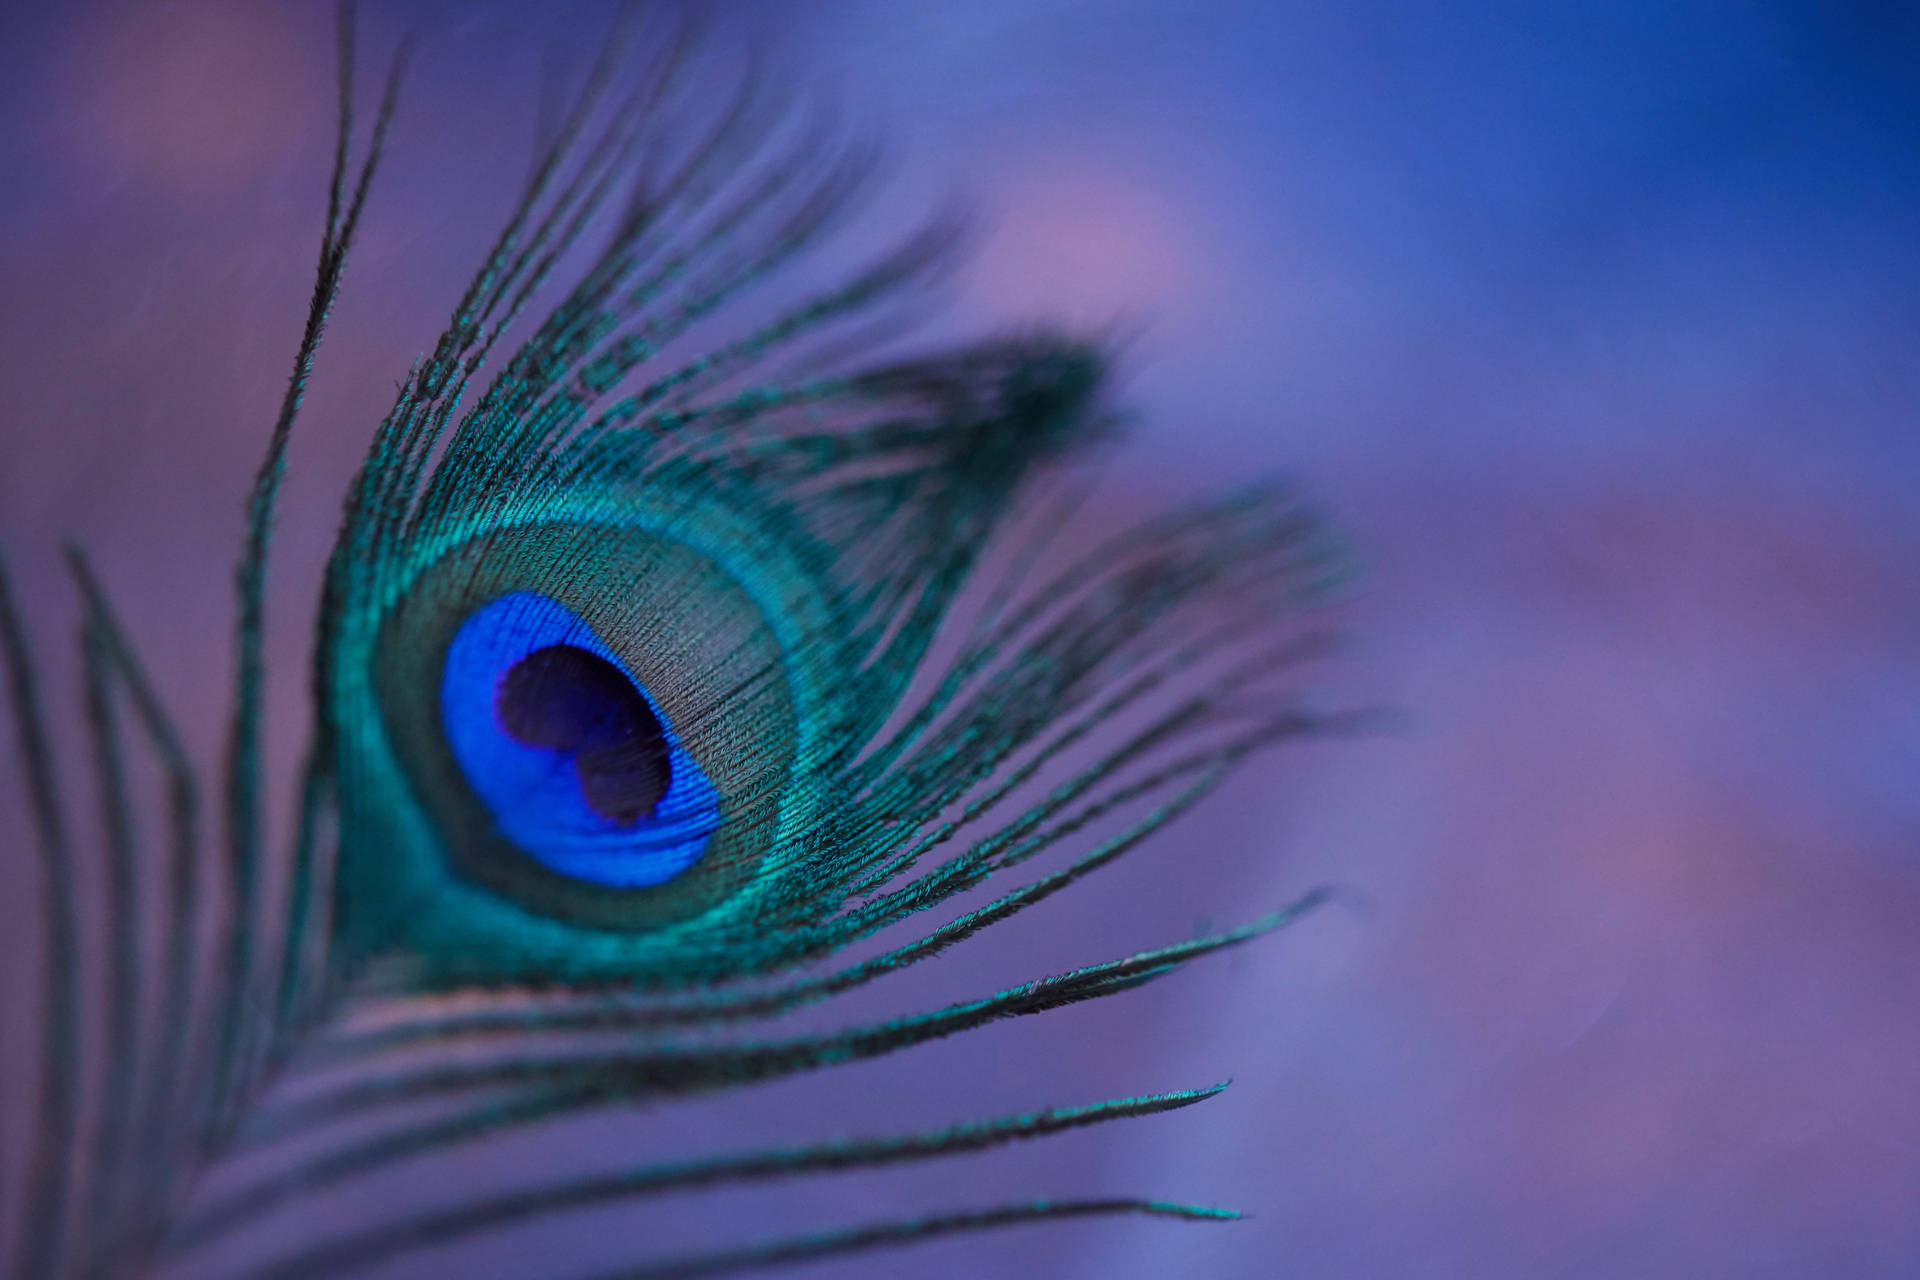 Radiant Blue-green Mor Pankh (peacock Feather) Against A High Contrast Background